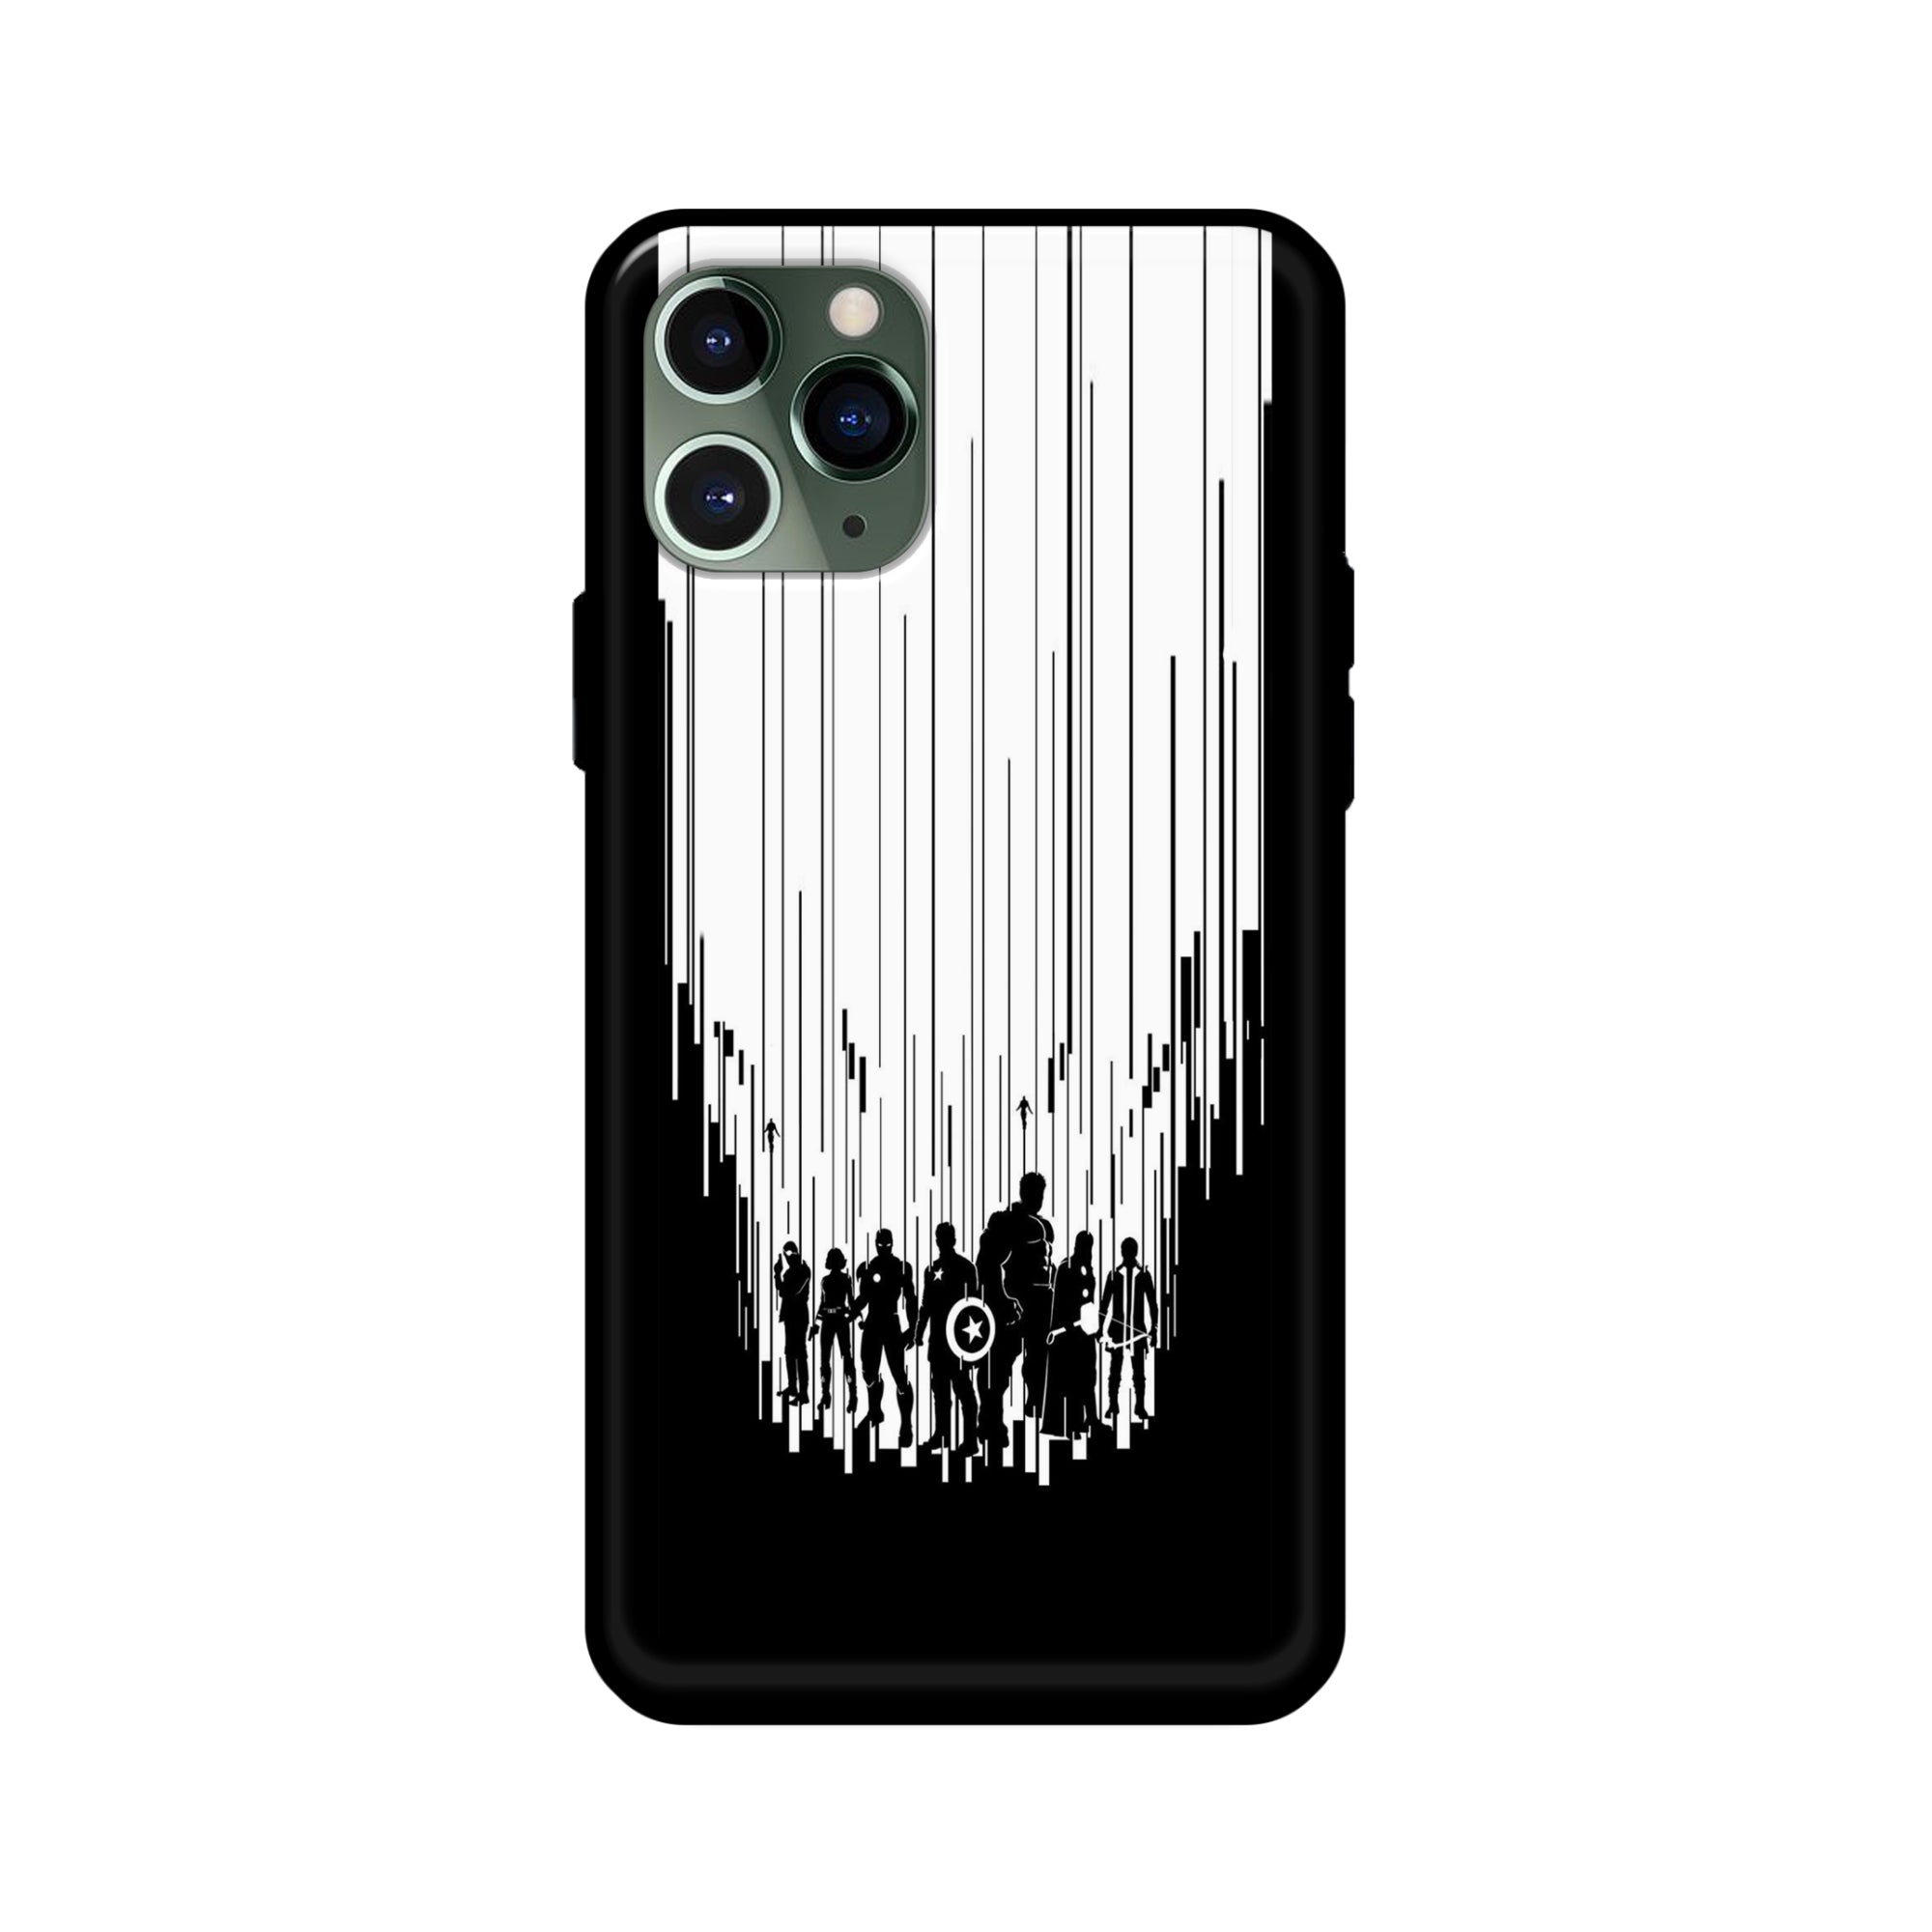 Buy Black And White Avanegers Glass/Metal Back Mobile Phone Case/Cover For iPhone 11 Pro Online